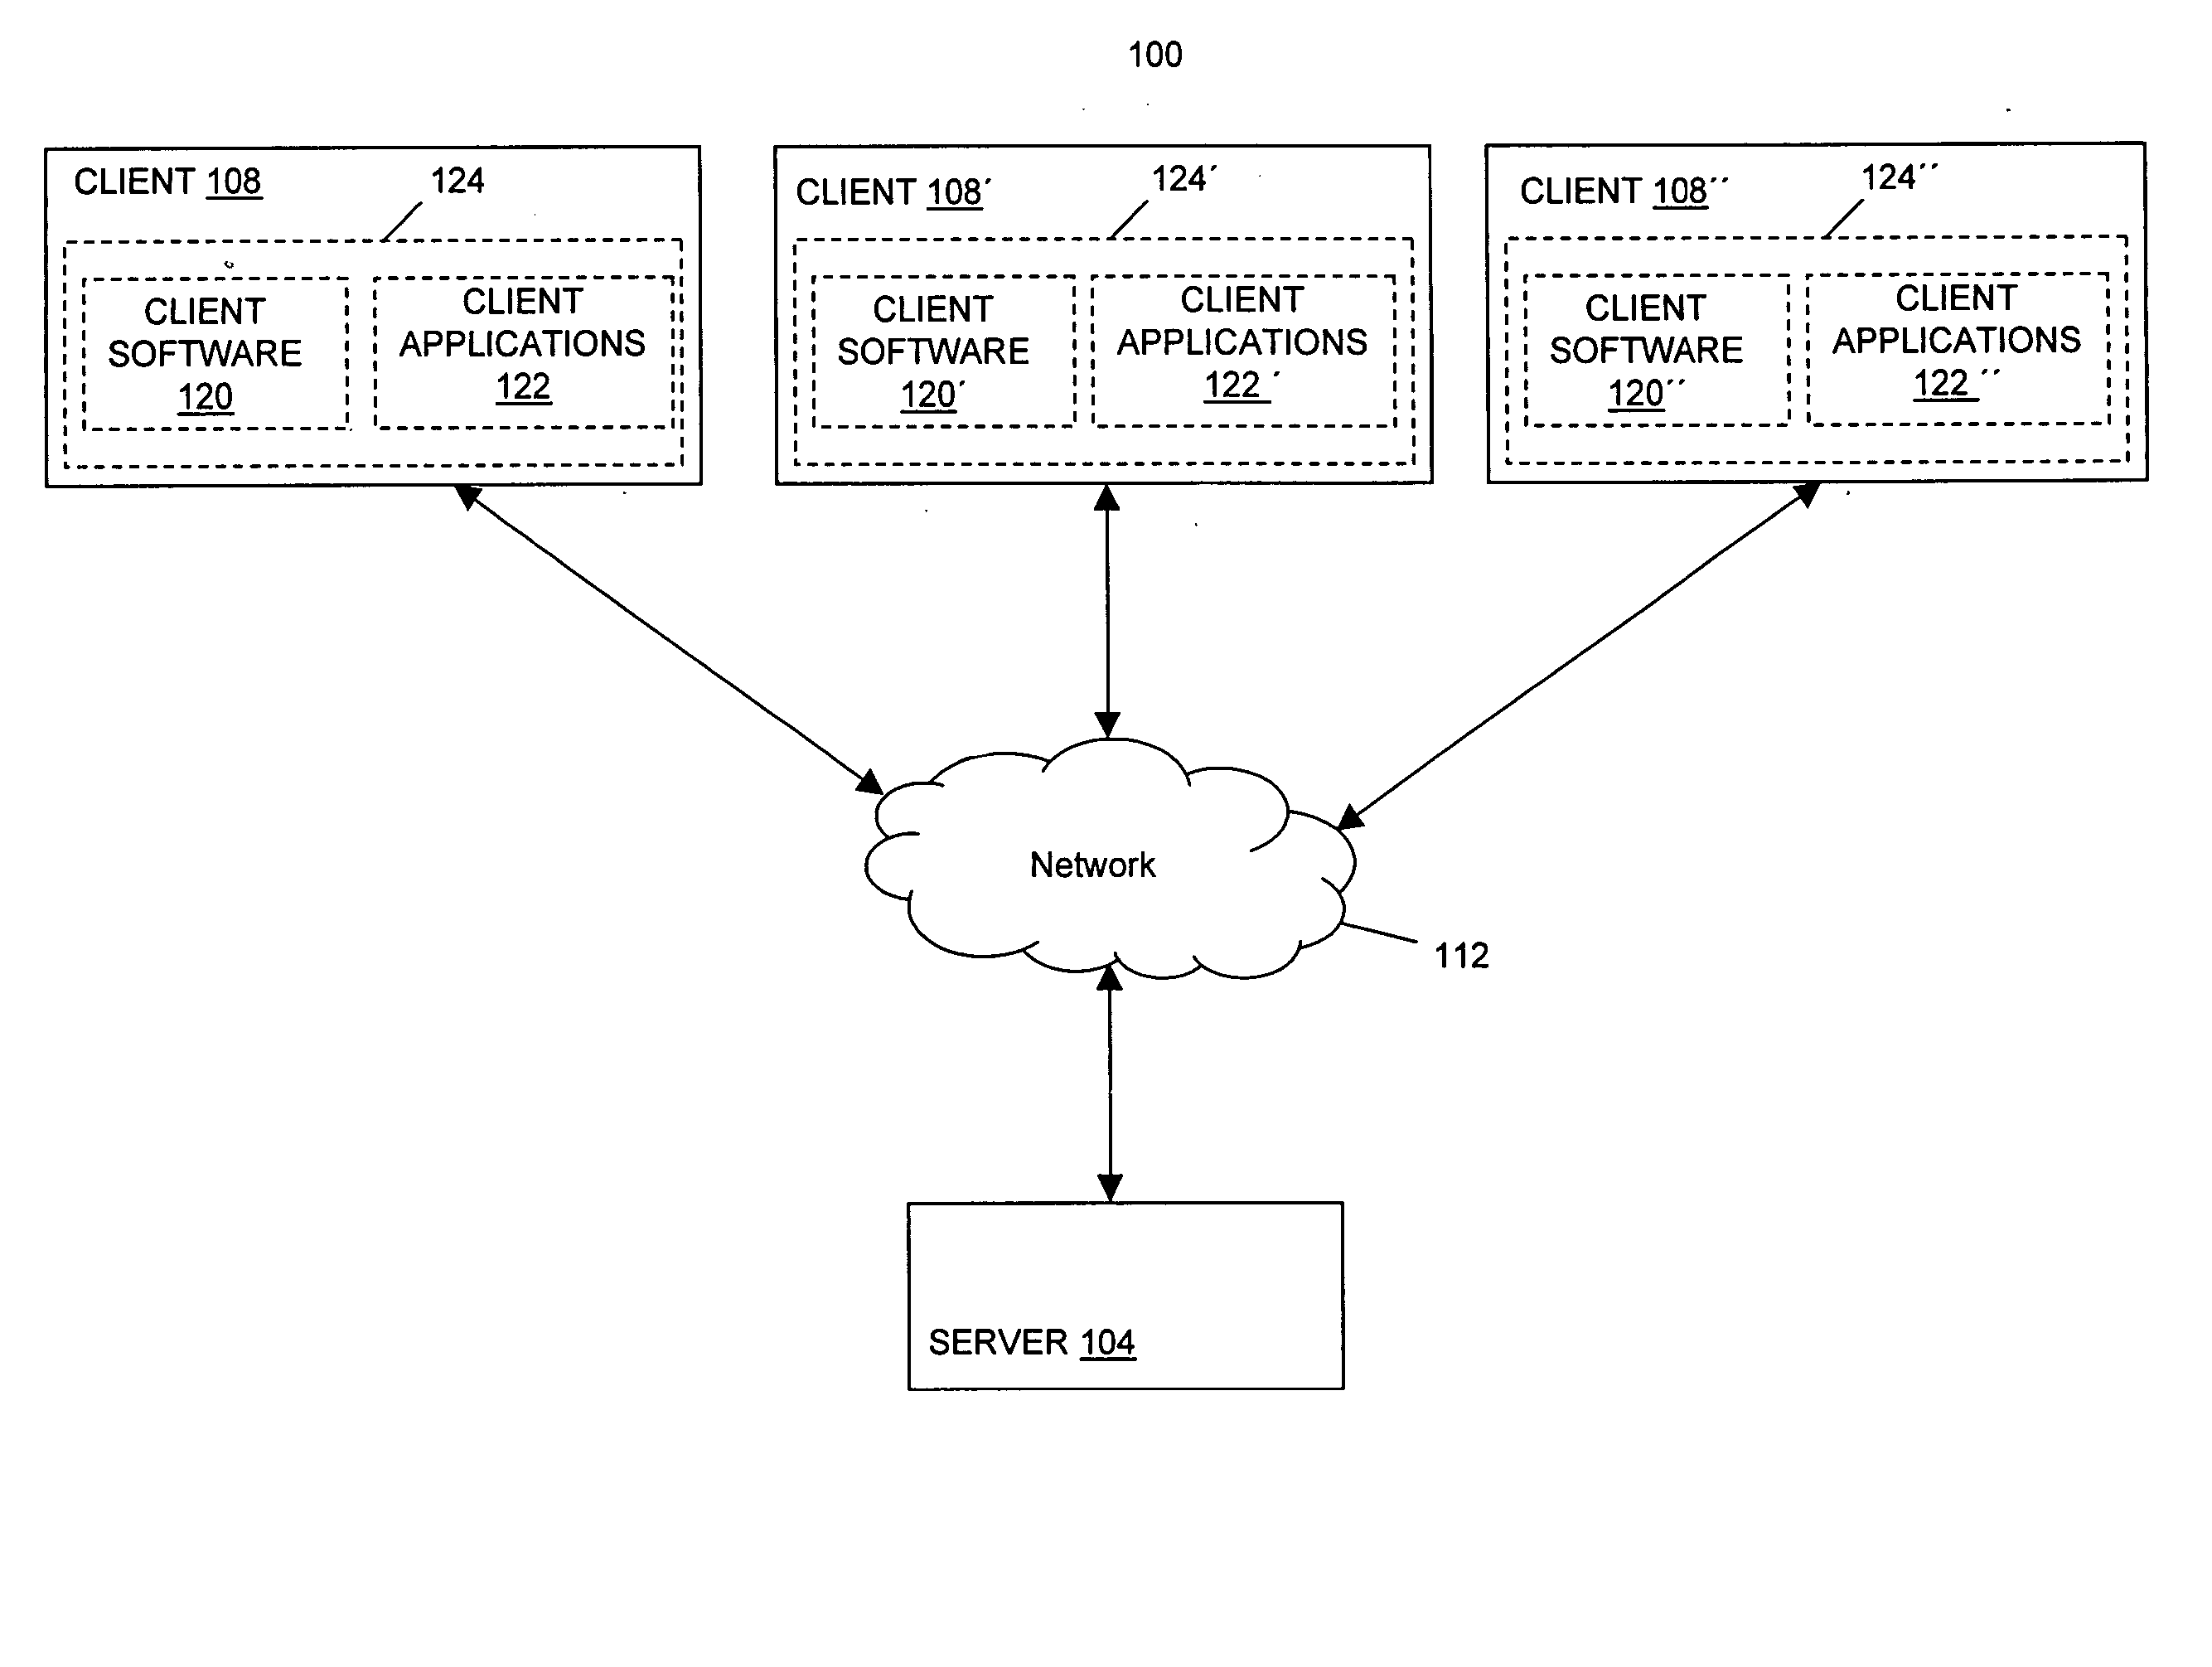 Systems and methods for retrieving data